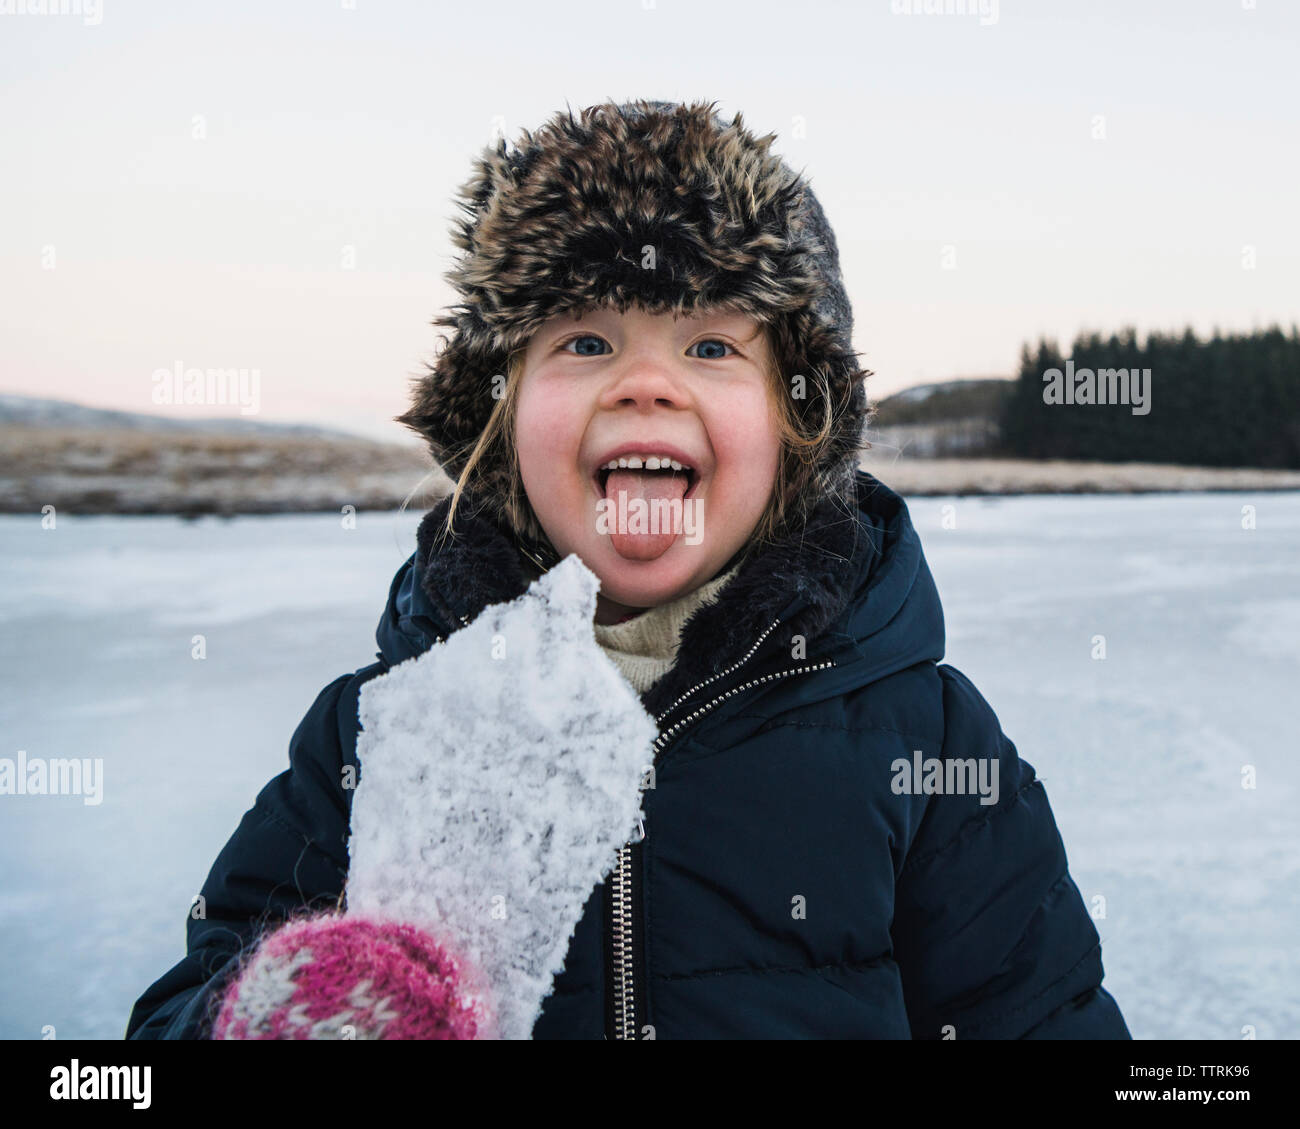 Portrait of playful girl sticking out tongue while holding ice during winter Stock Photo